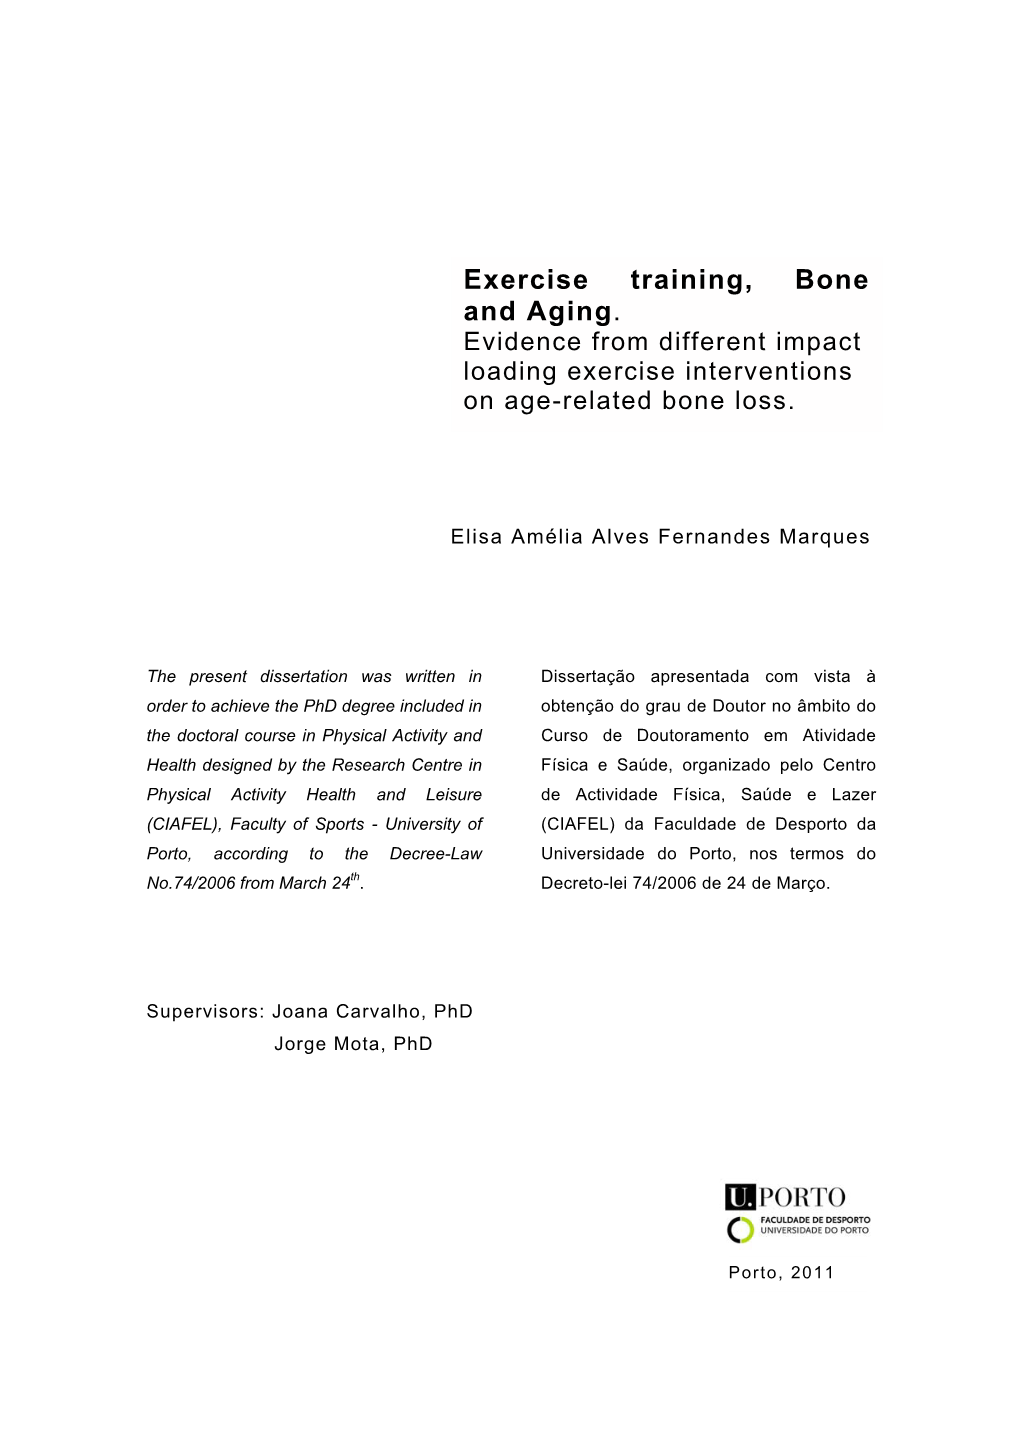 Exercise Training, Bone and Aging. Evidence from Different Impact Loading Exercise Interventions on Age-Related Bone Loss